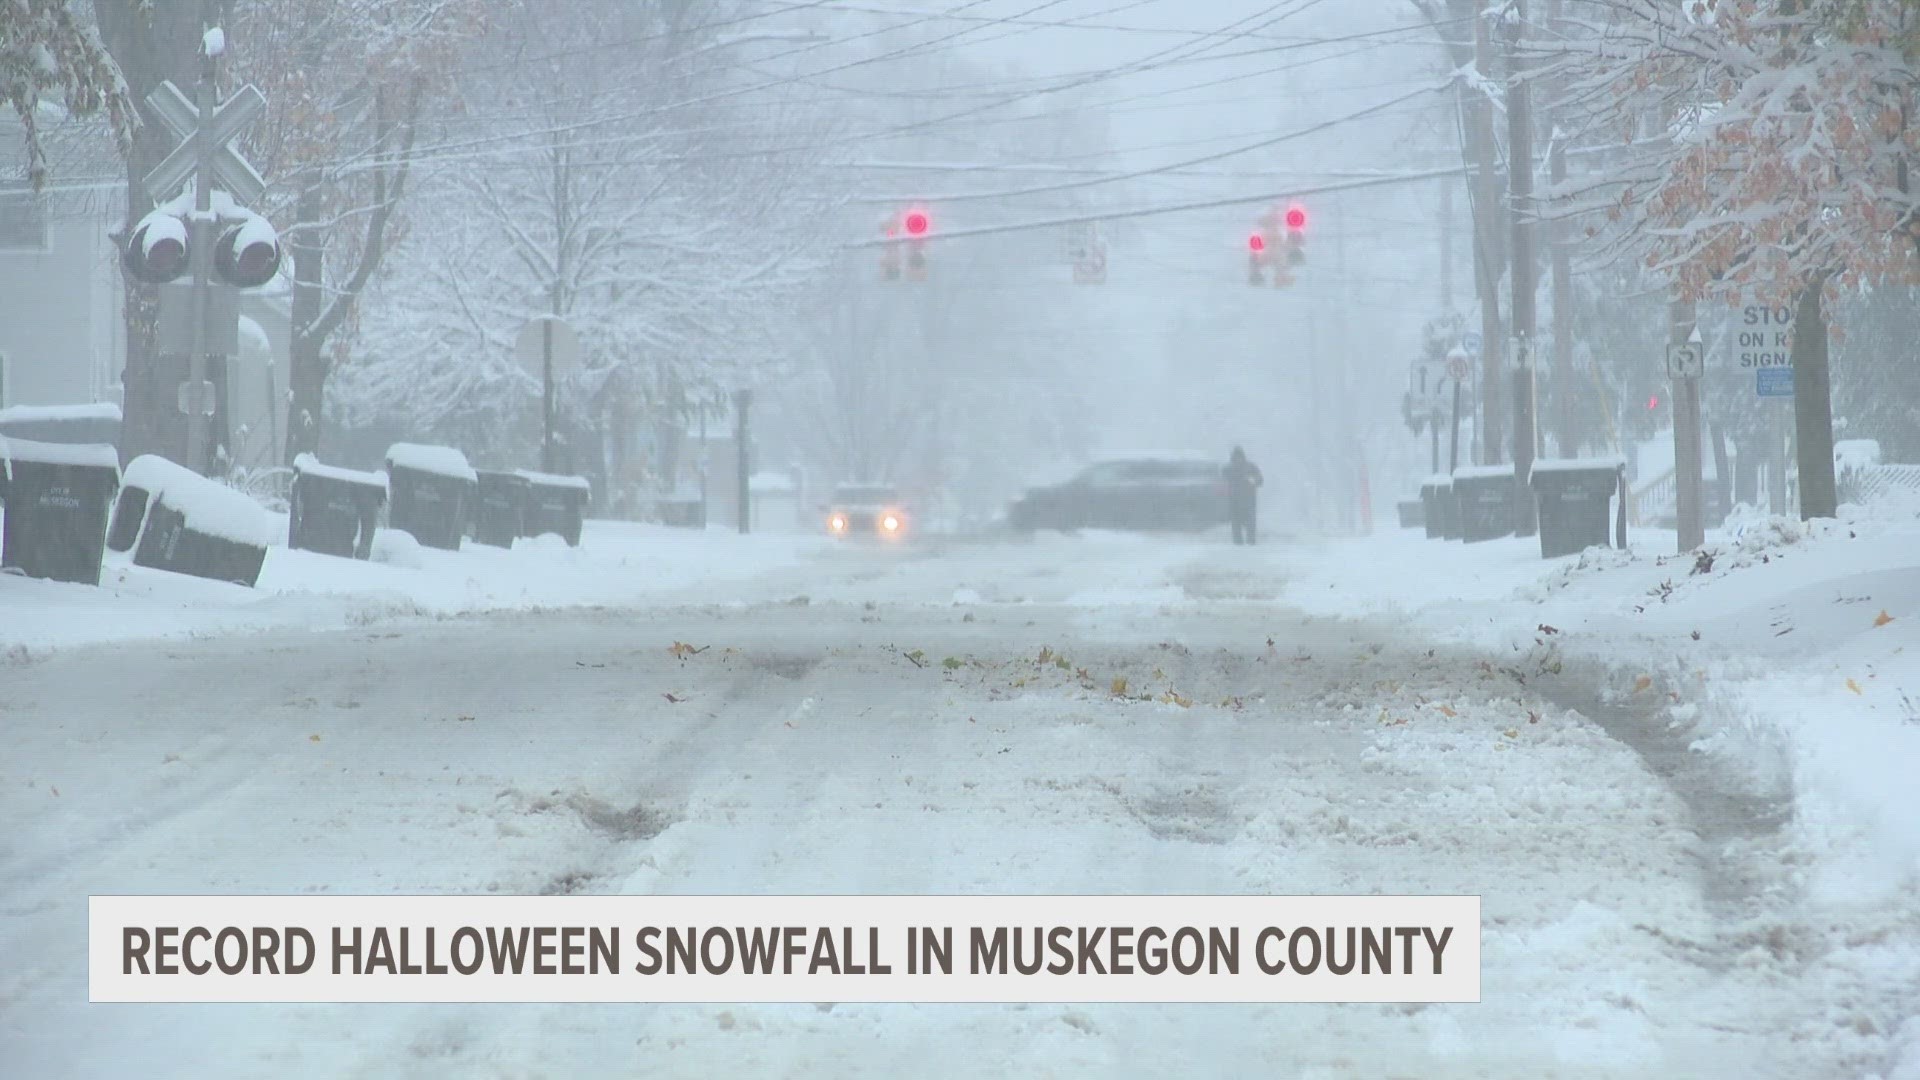 Halloween's surprise snow storm broke the record for the most snow on Halloween ever recorded in Muskegon County.